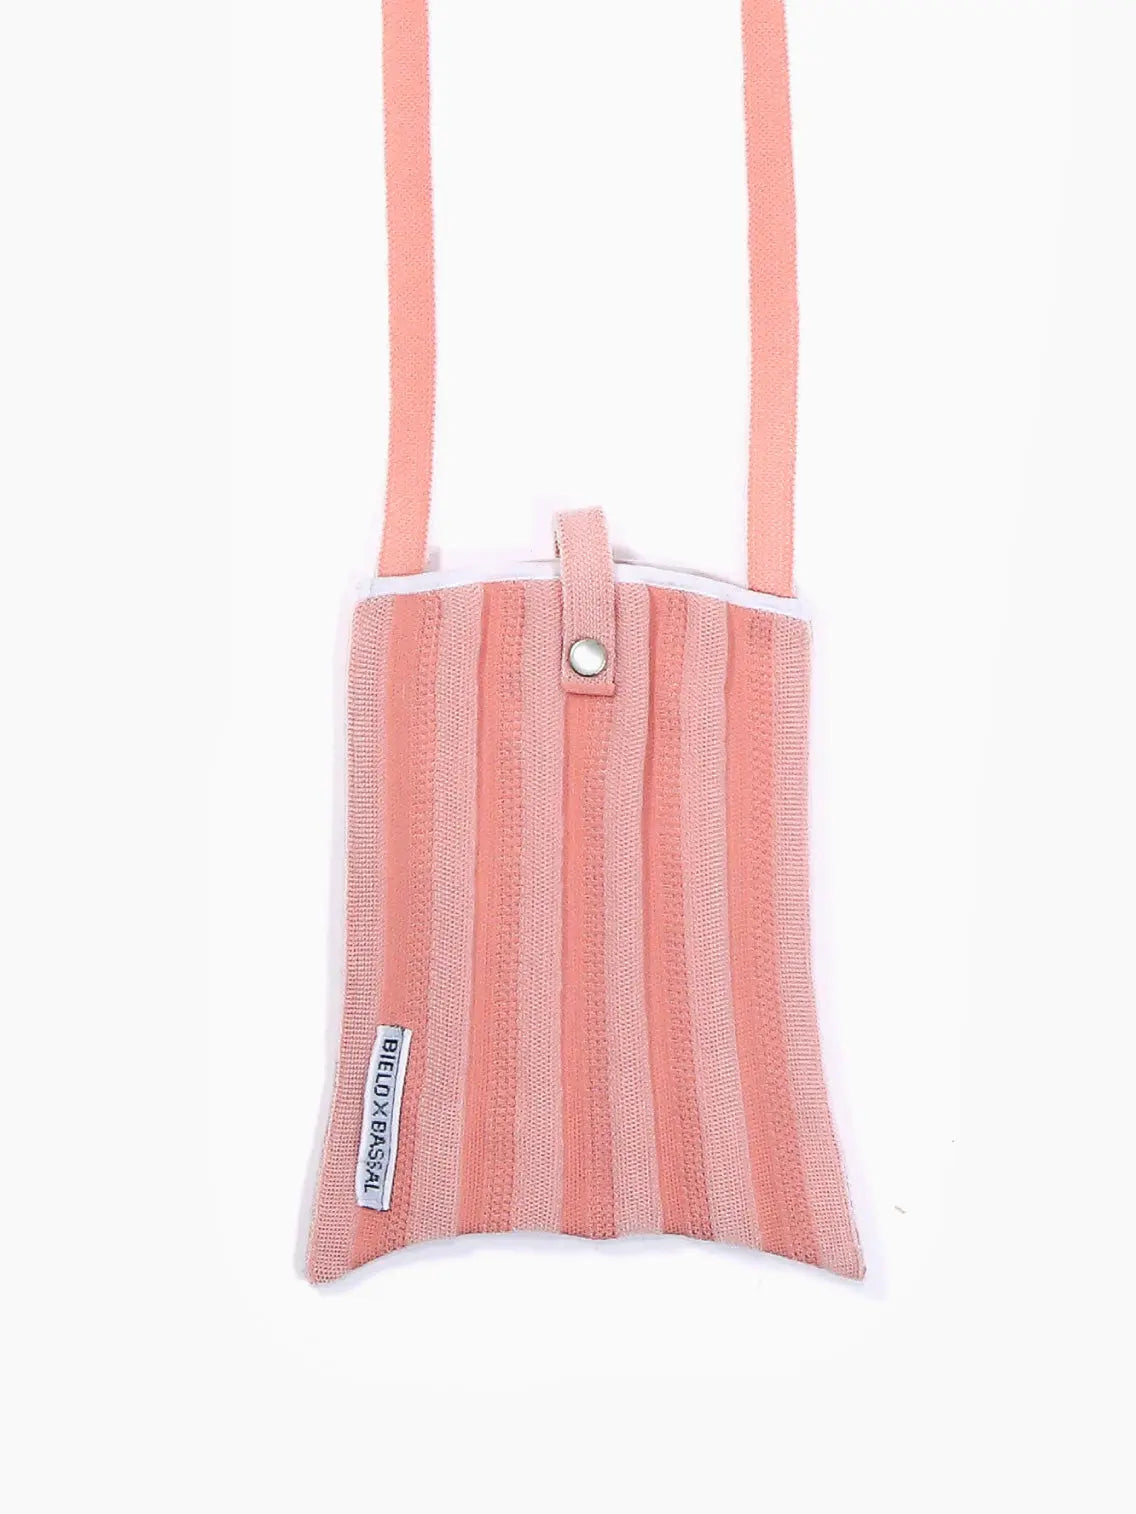 A pink and white striped fabric Pink Shoulder Bag with a top snap closure and a long strap. The Pink Shoulder Bag, available on BassalStore, has a small label on the side that reads "STICK with STYLE." The background is white, making it perfect for your next shopping trip in Barcelona.